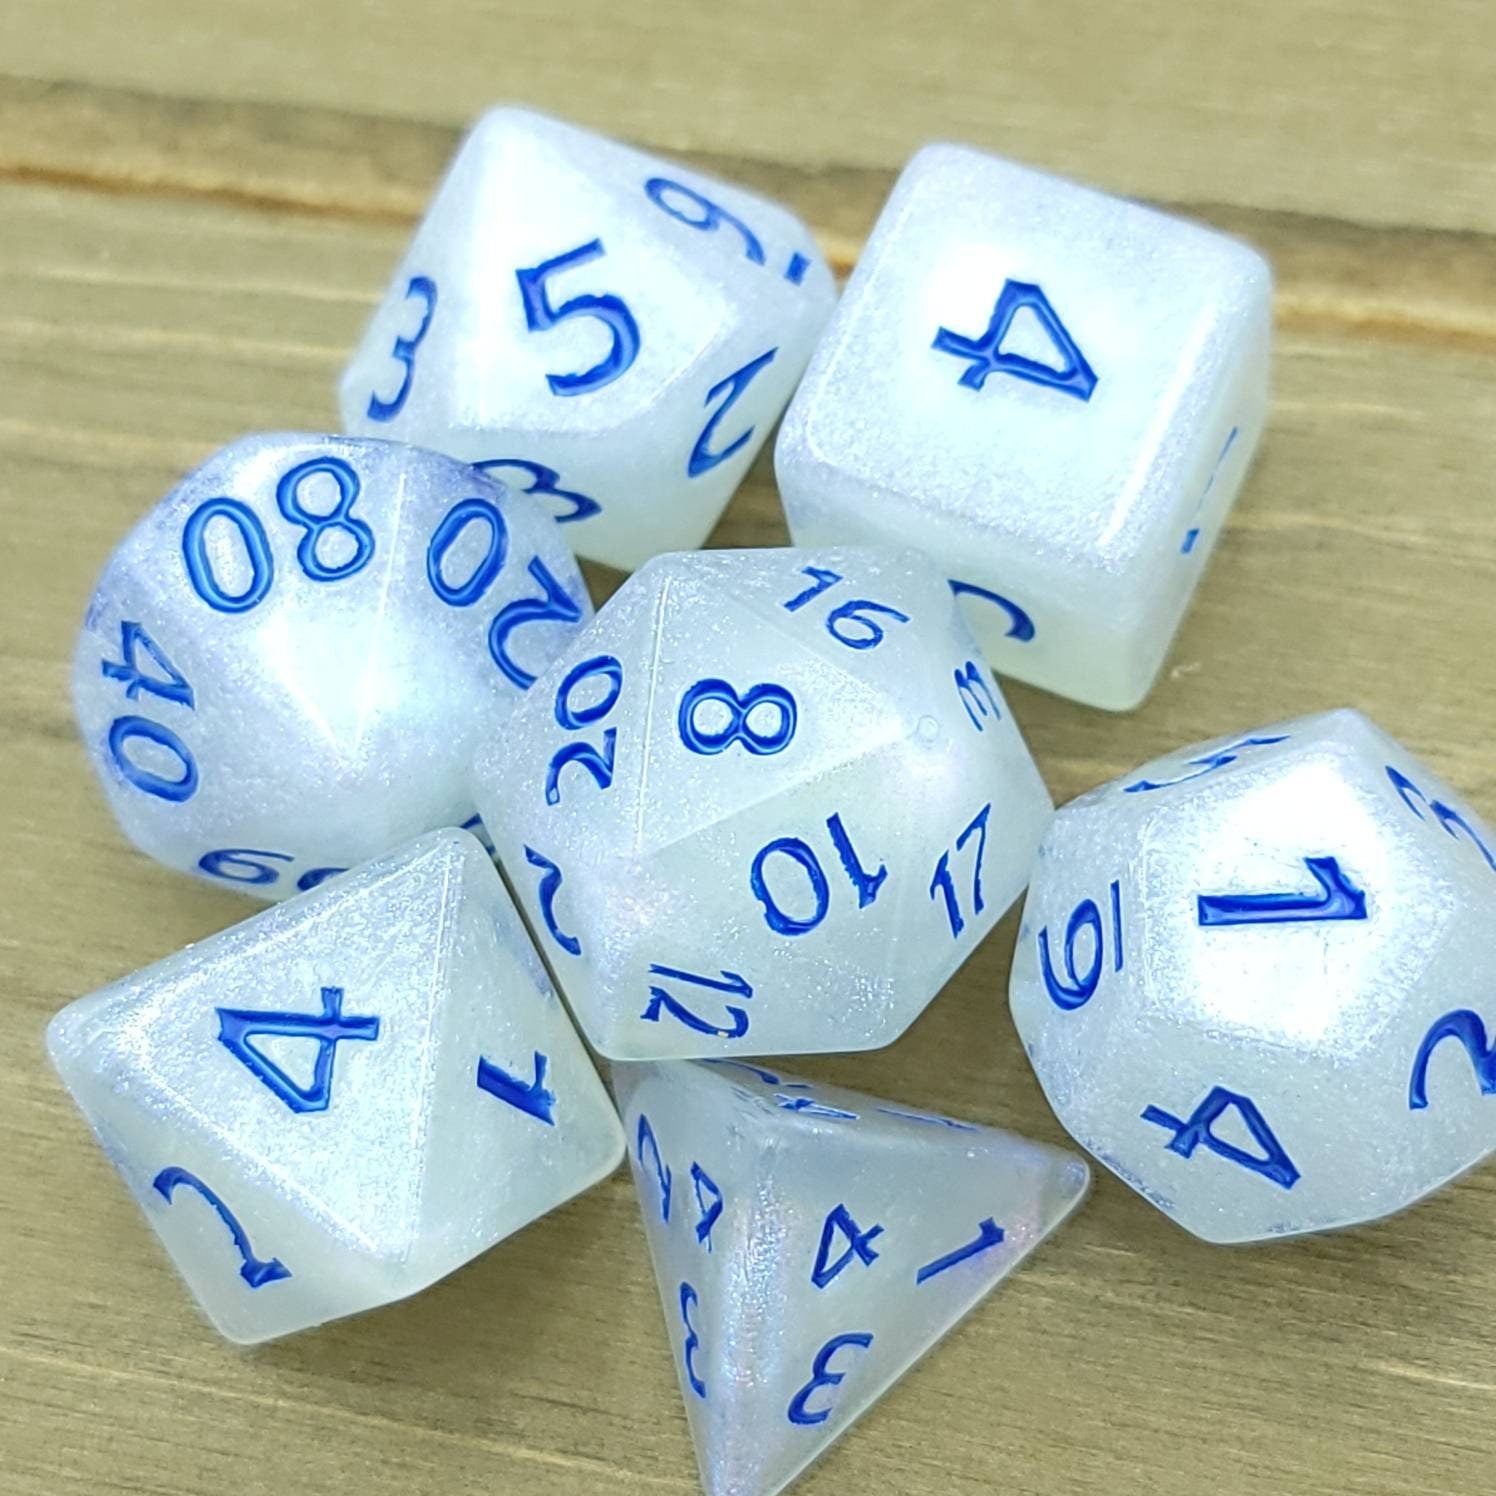 Opalescence | RPG Dice Set| RPG Dice | Polyhedral Dice Set | Dungeons and Dragons | DnD Dice Set | Gaming Dice Set